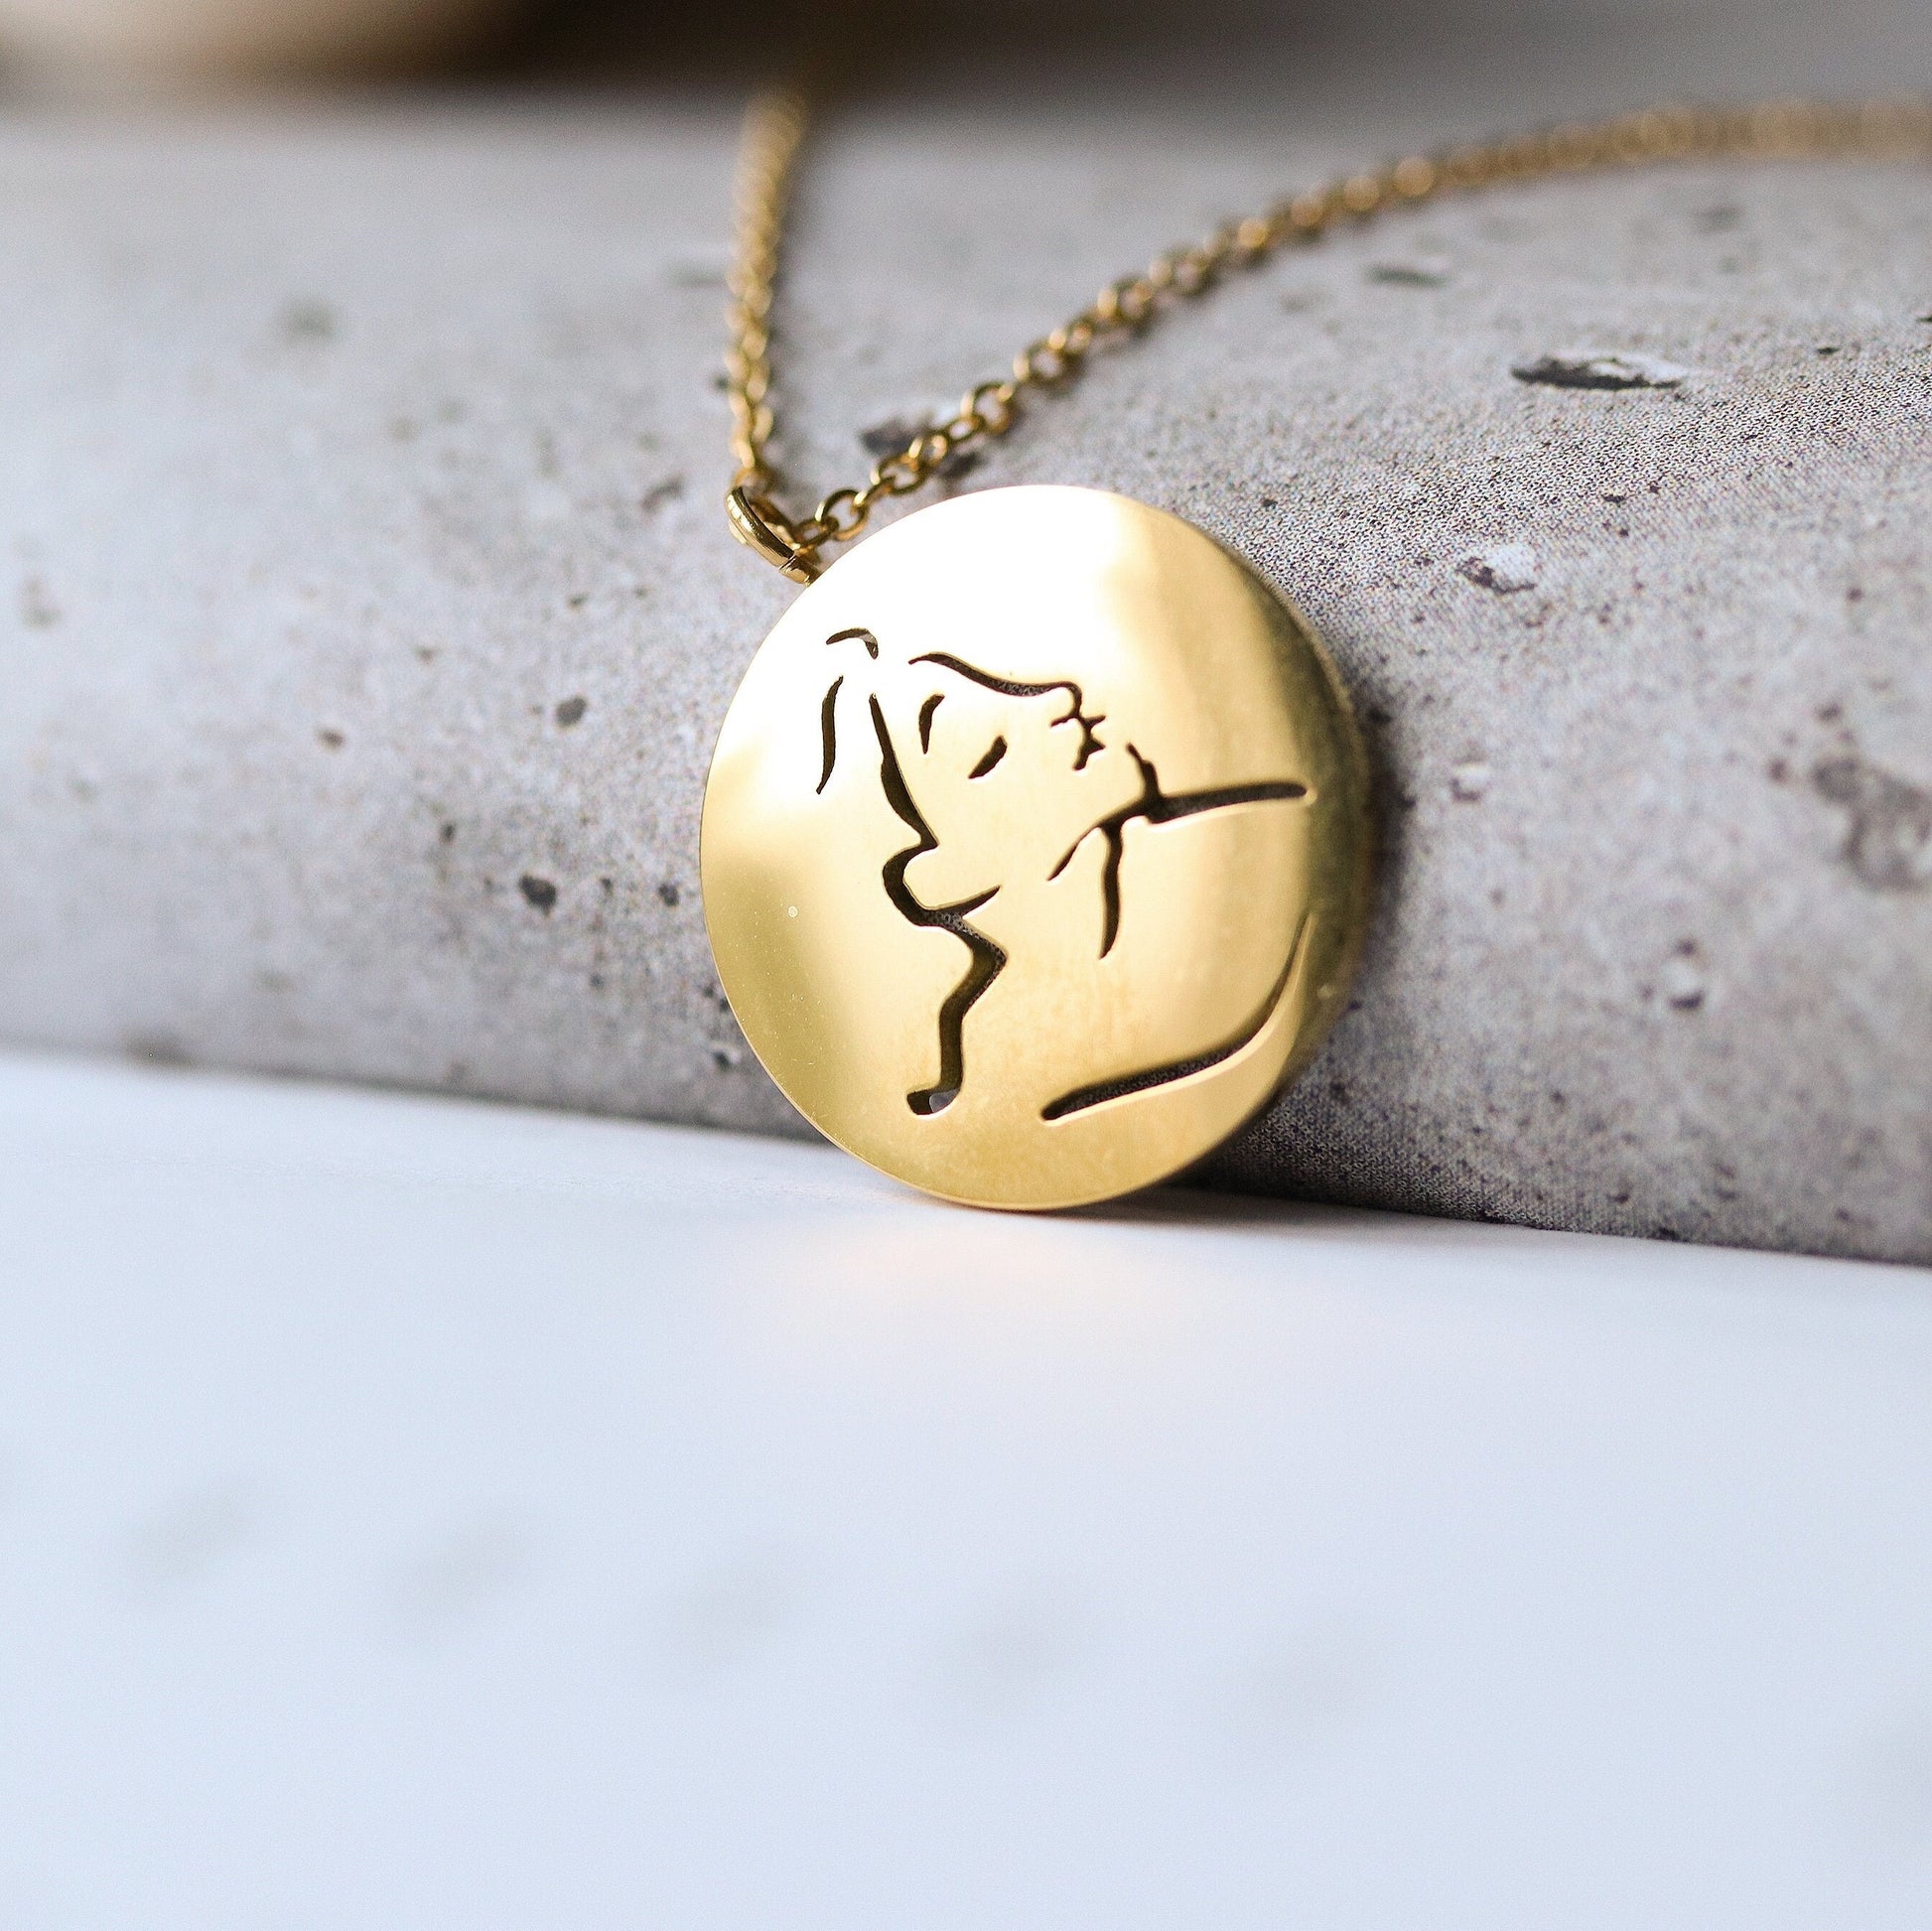 Sister Gift / Gold Sister Necklace / Gold Minimalist Disc Necklace /Stainless Steel Gold Necklace /Water Proof Minimalist Woman Jewellery